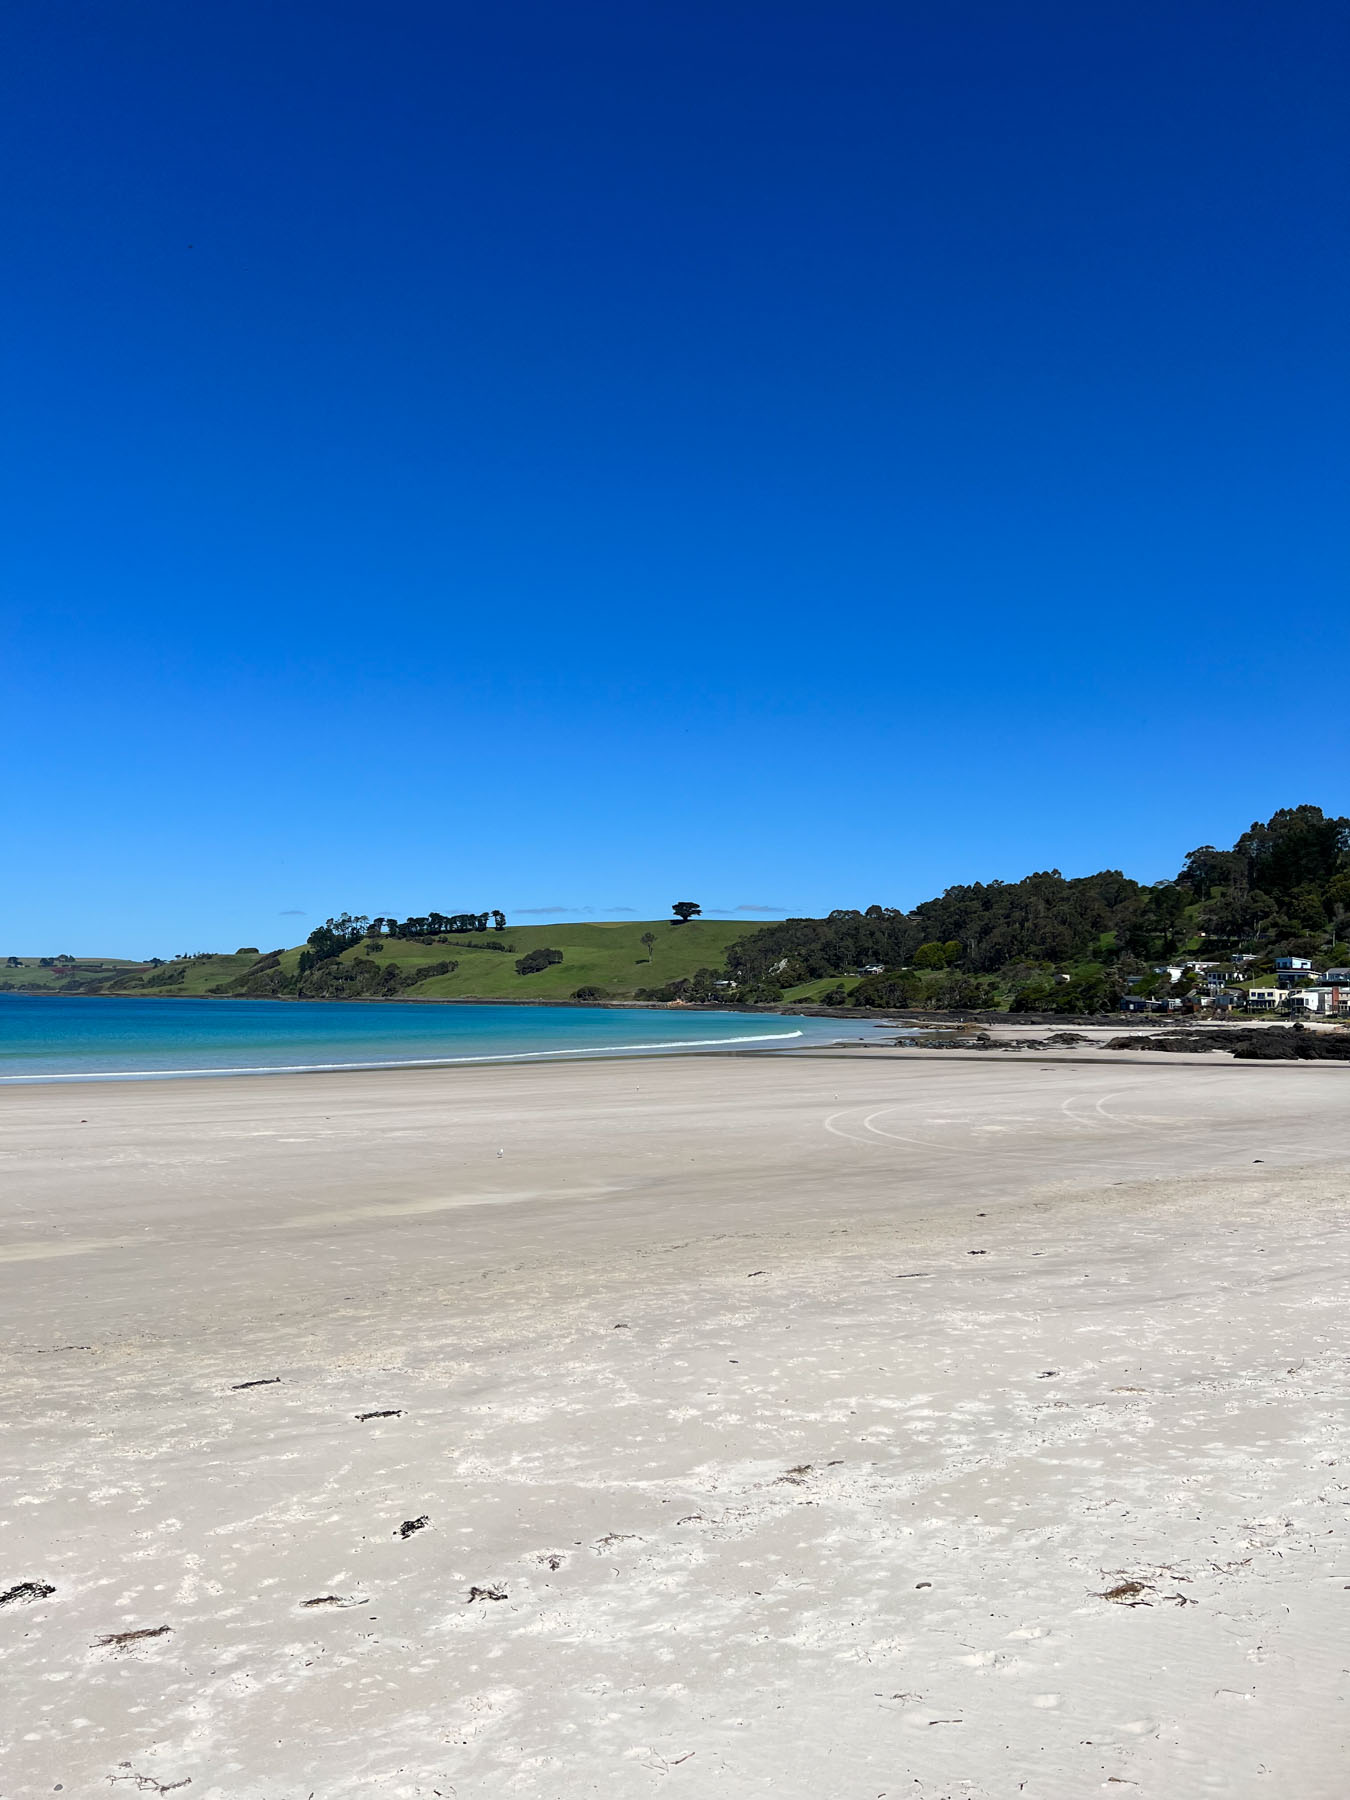 Discover the tranquil charm of Boat Harbour Beach with Coastline Tours. Join our guided tours to experience the white sands, turquoise waters, and breathtaking scenery of this hidden North West paradise.